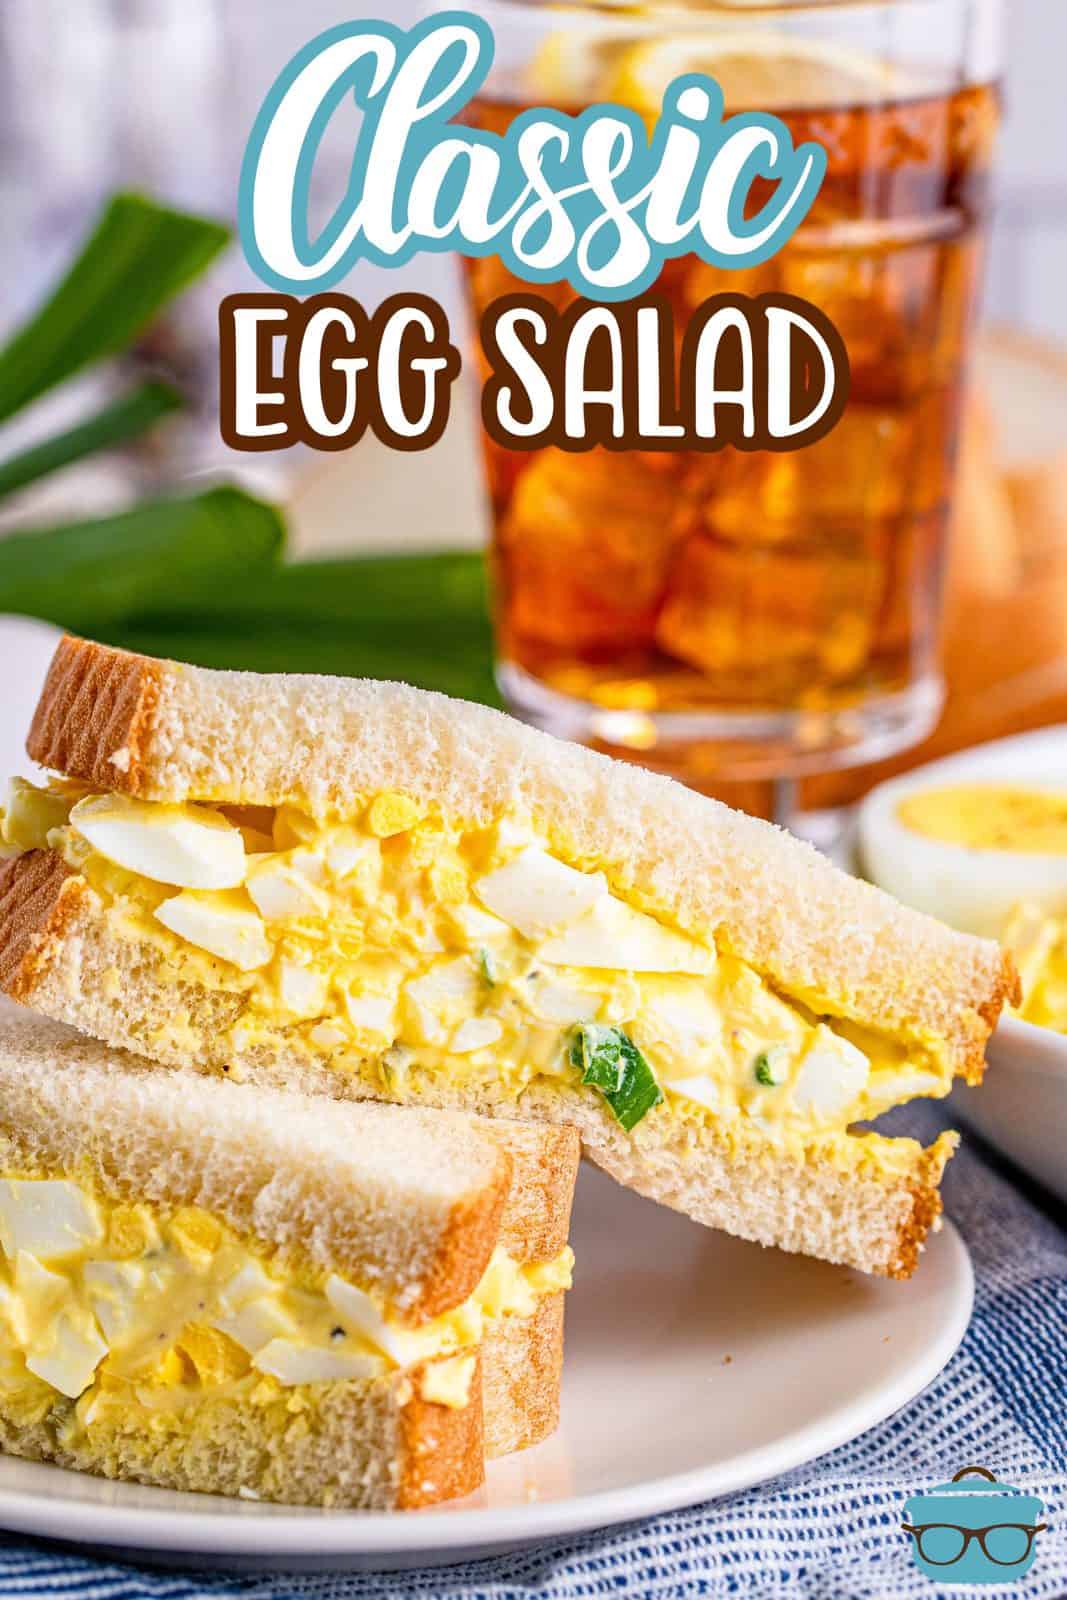 two half egg salad sandwiches stacked on top of each other with a glass of iced tea in the background.